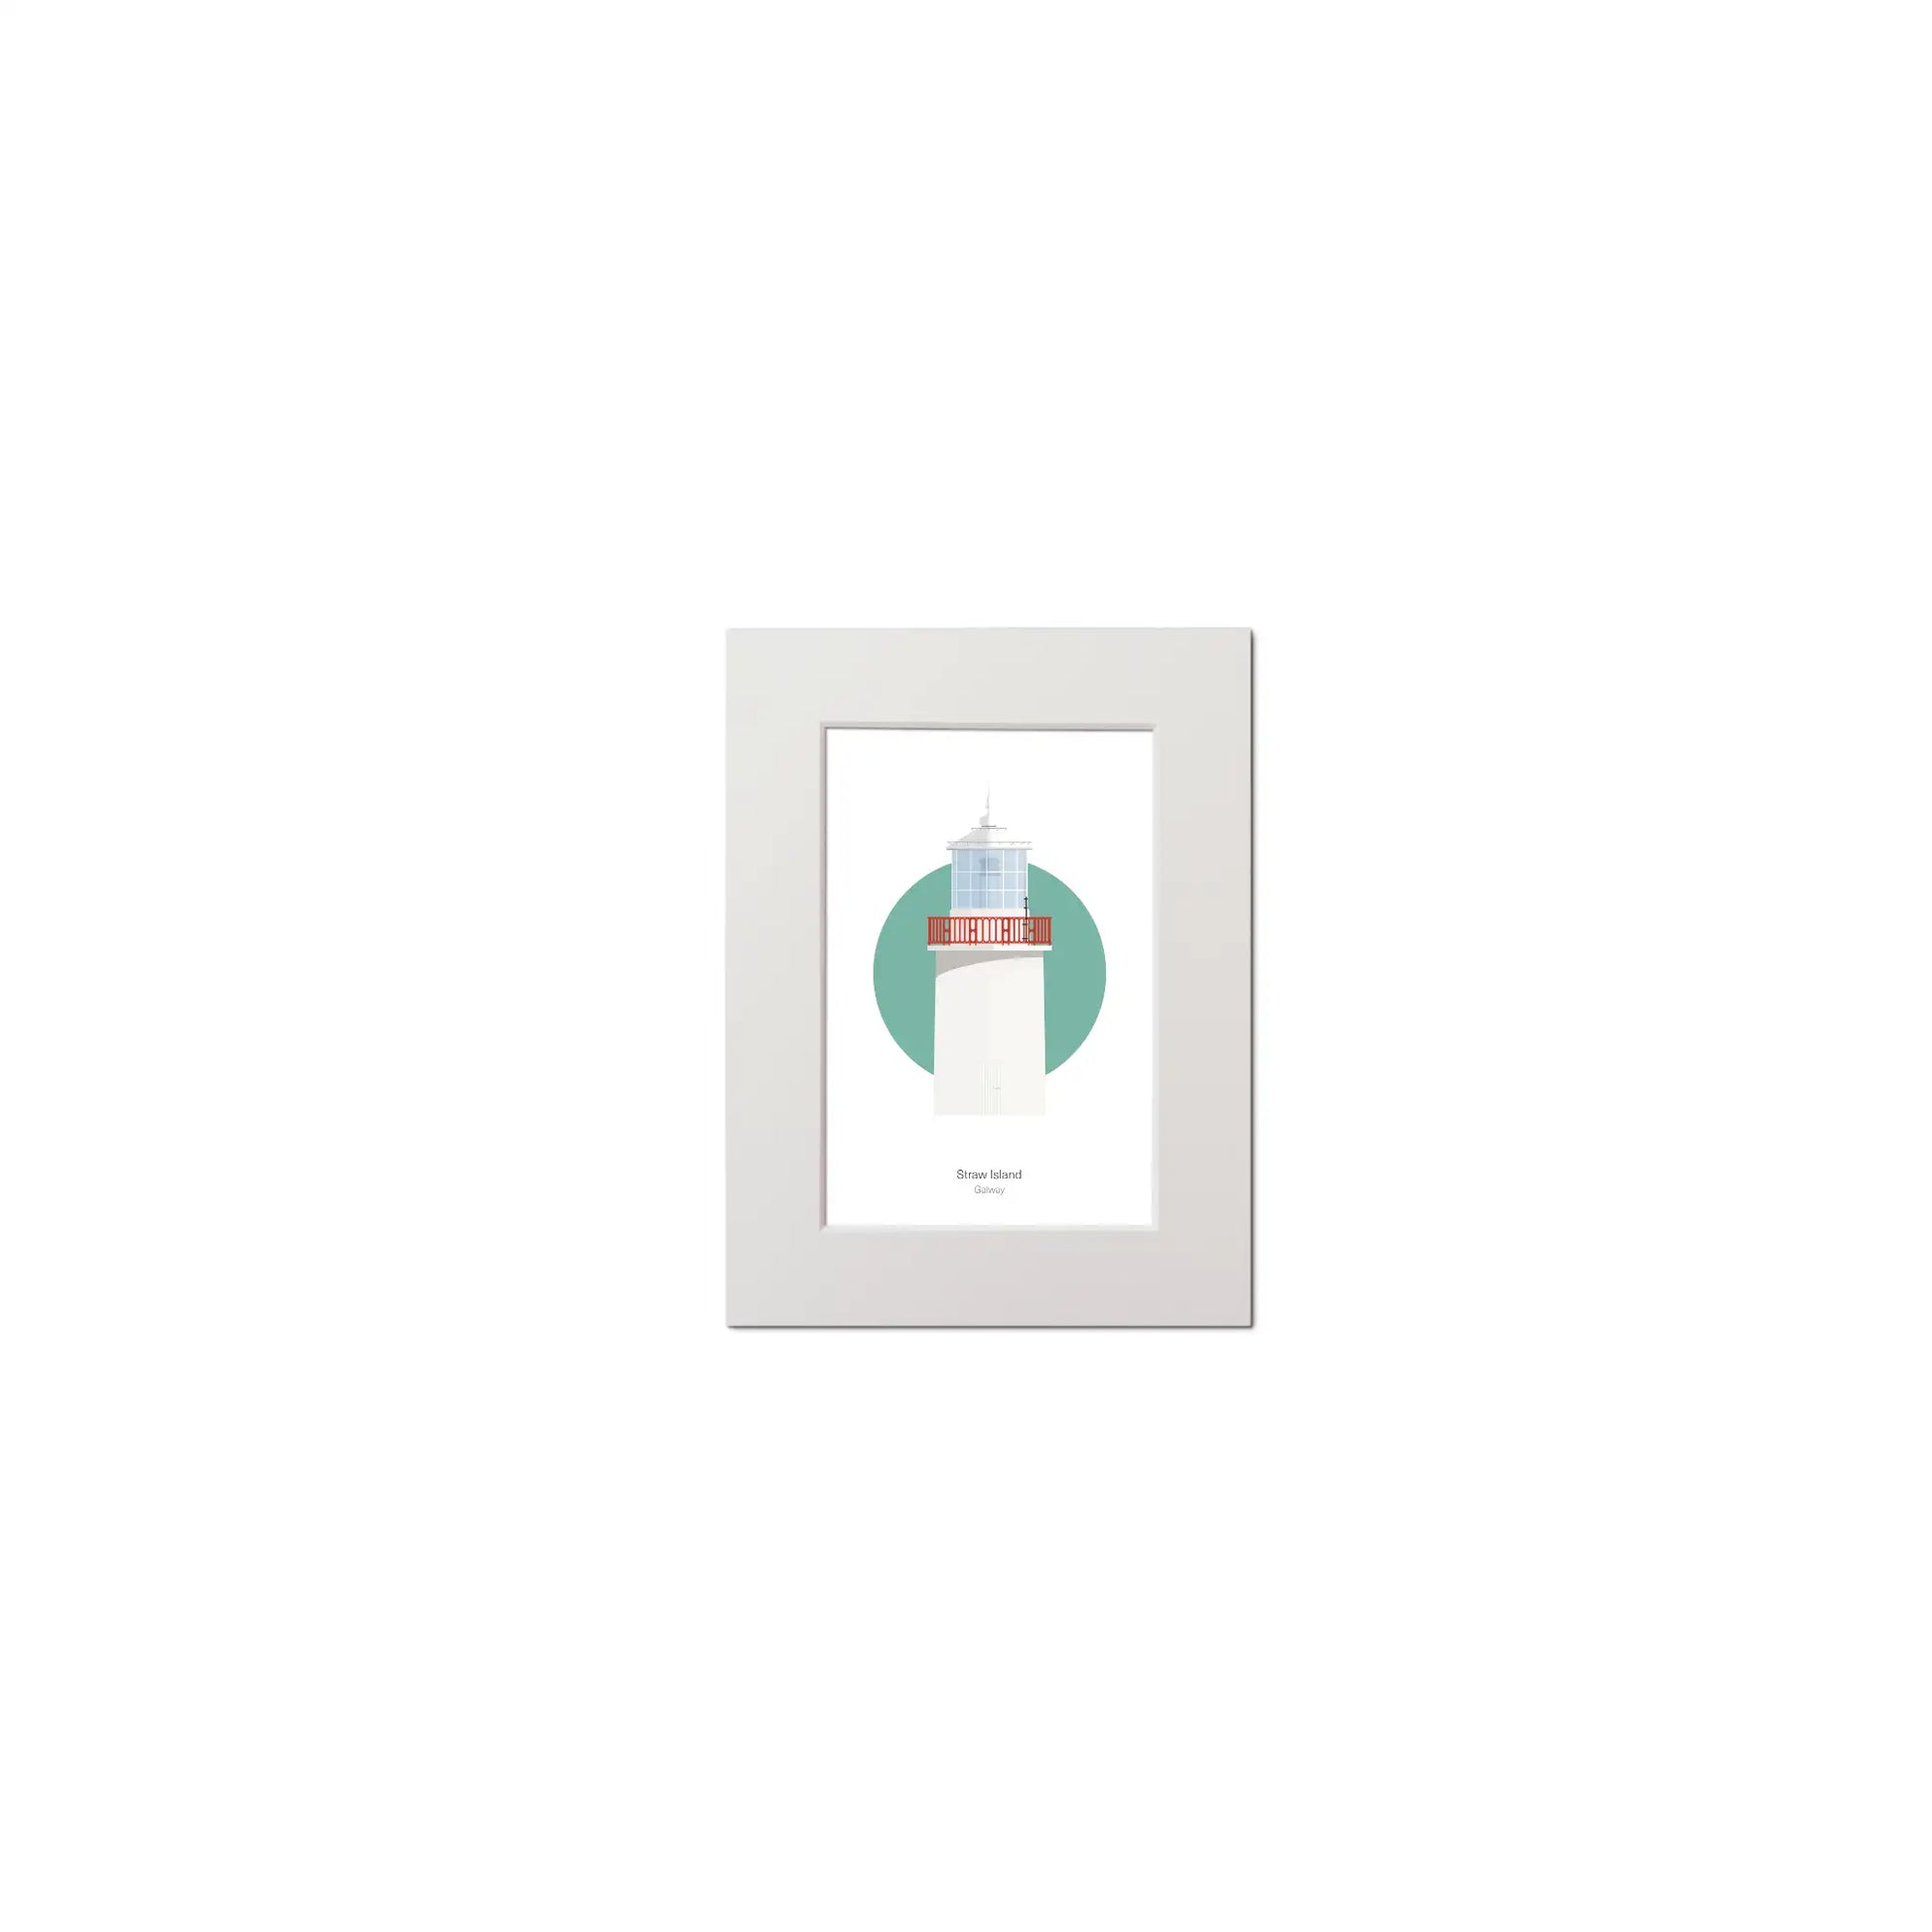 Contemporary graphic illustration of Straw Island lighthouse on a white background inside light blue square, mounted and measuring 15x20cm.